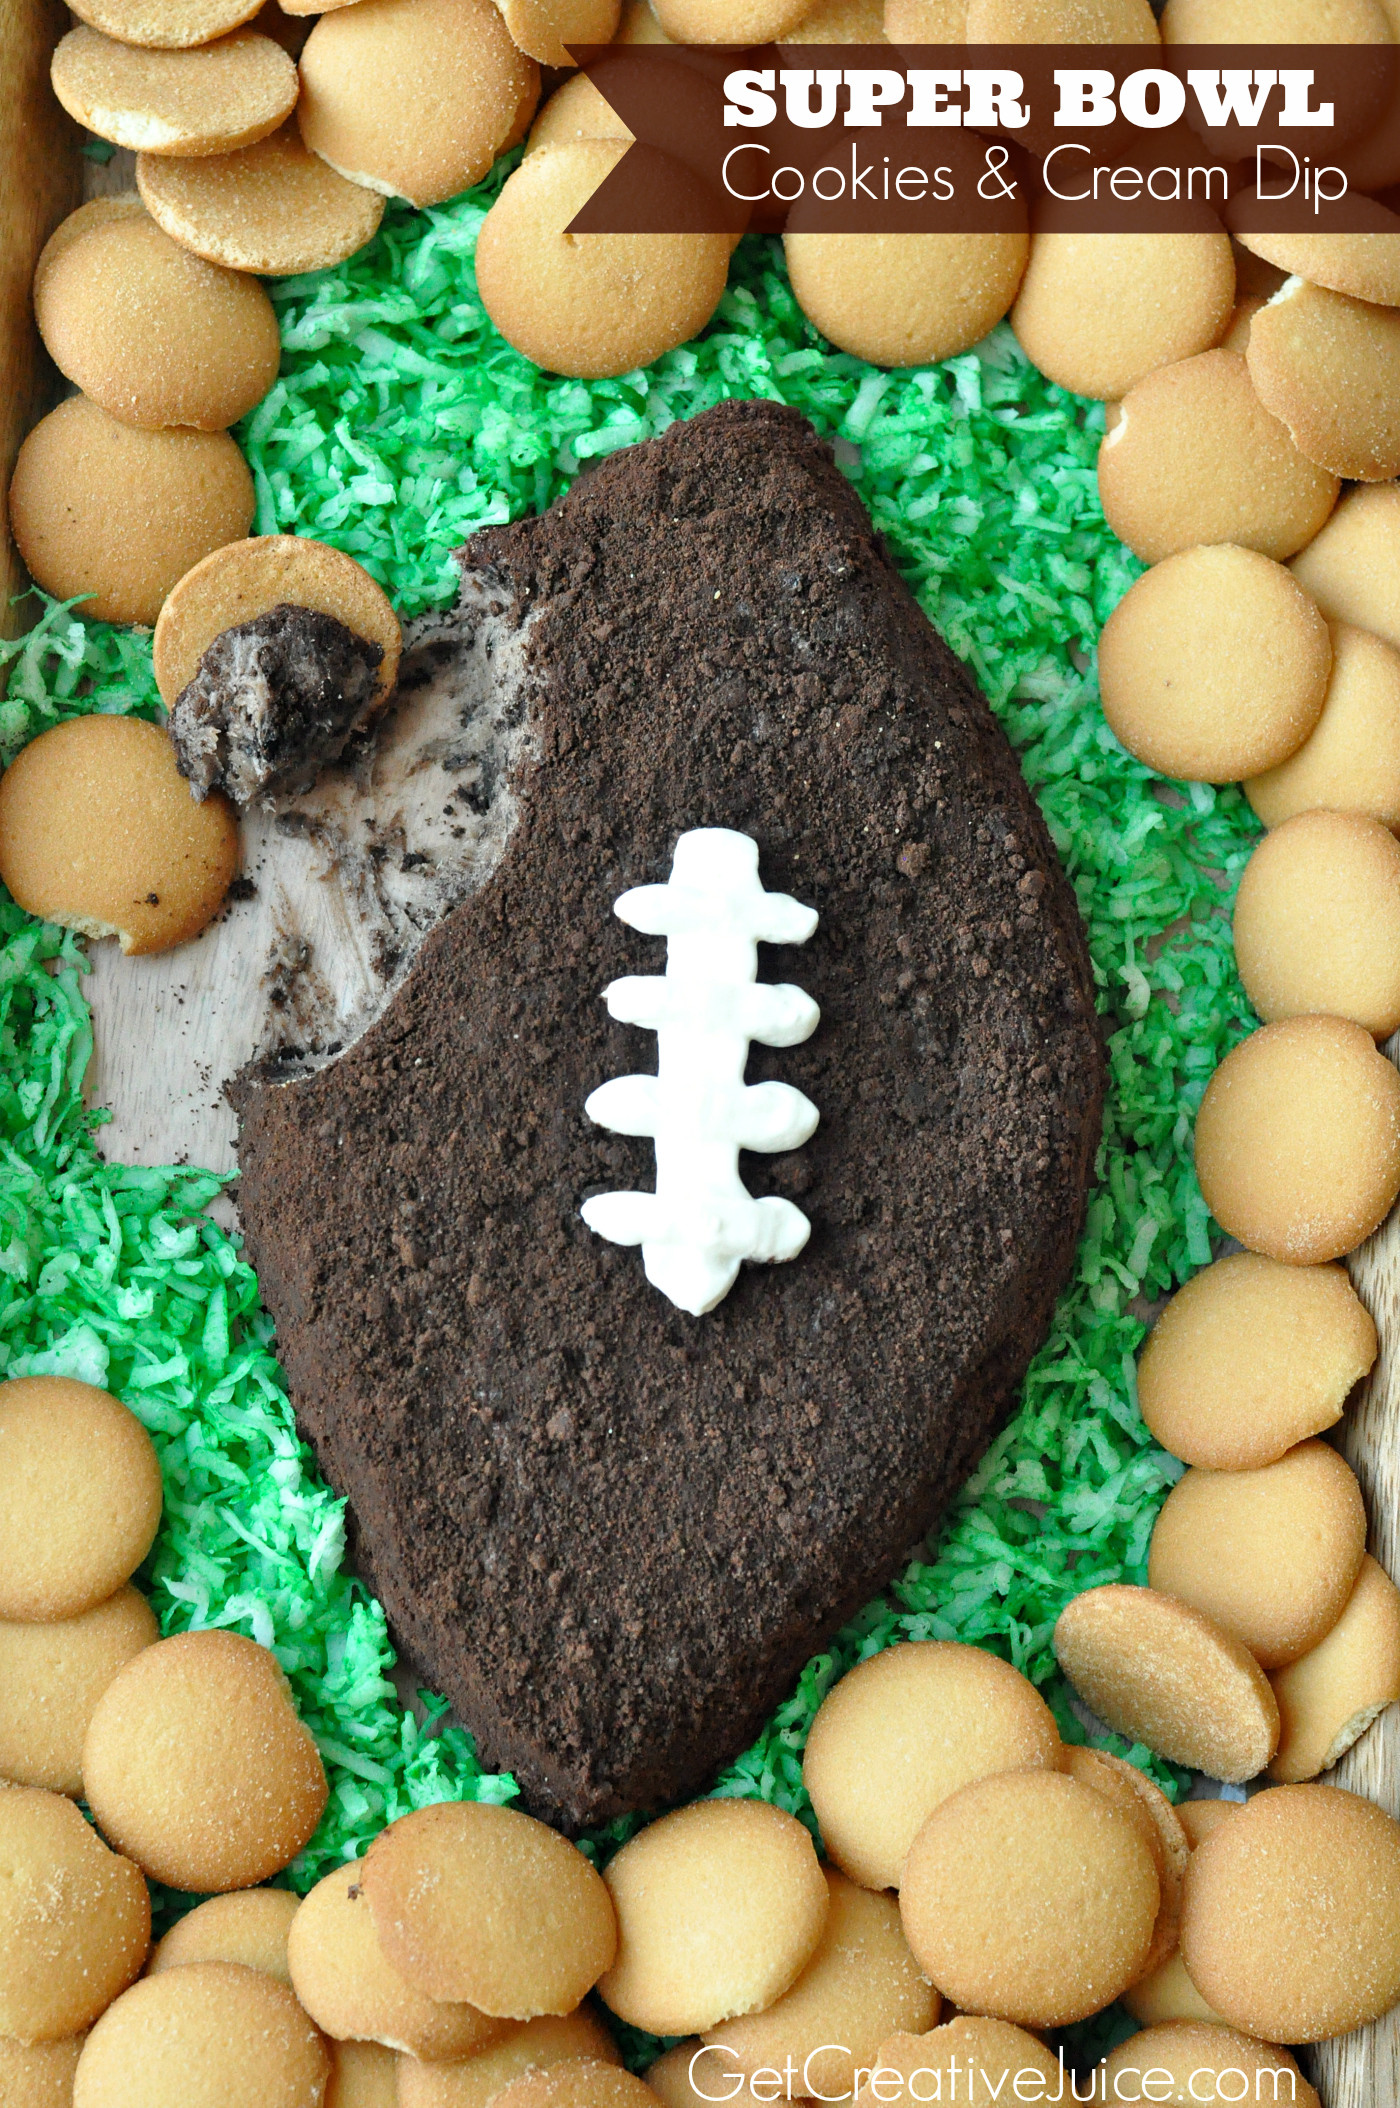 Football Party Desserts
 Football Cookies and Cream Dip Creative Juice